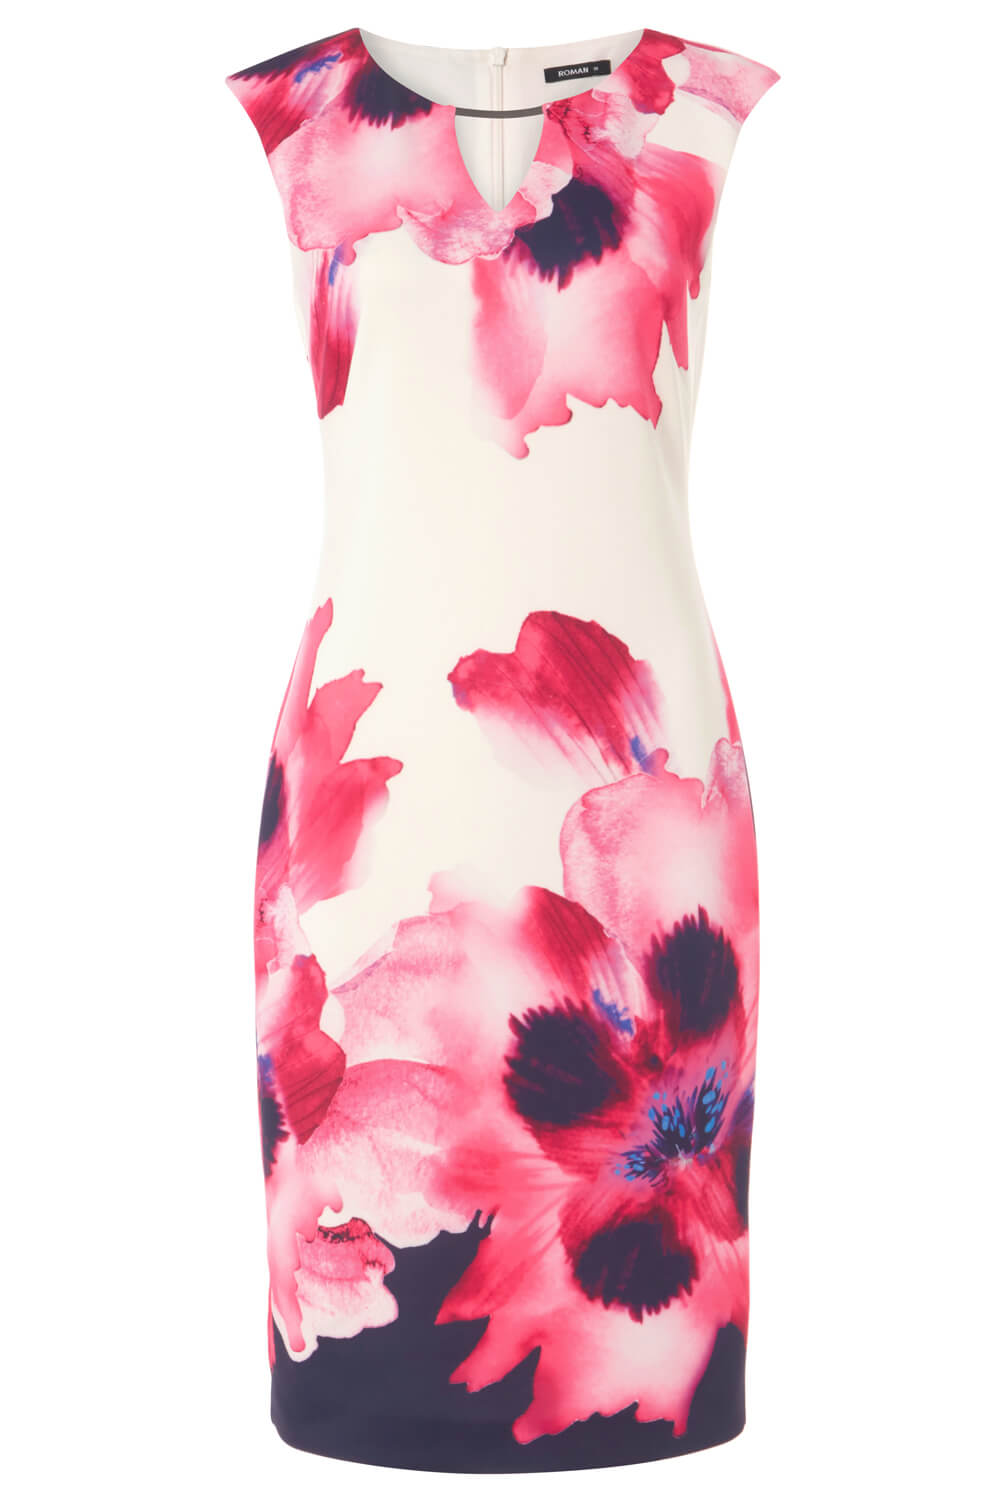 Fuchsia Floral Print Fitted Scuba Dress, Image 5 of 5